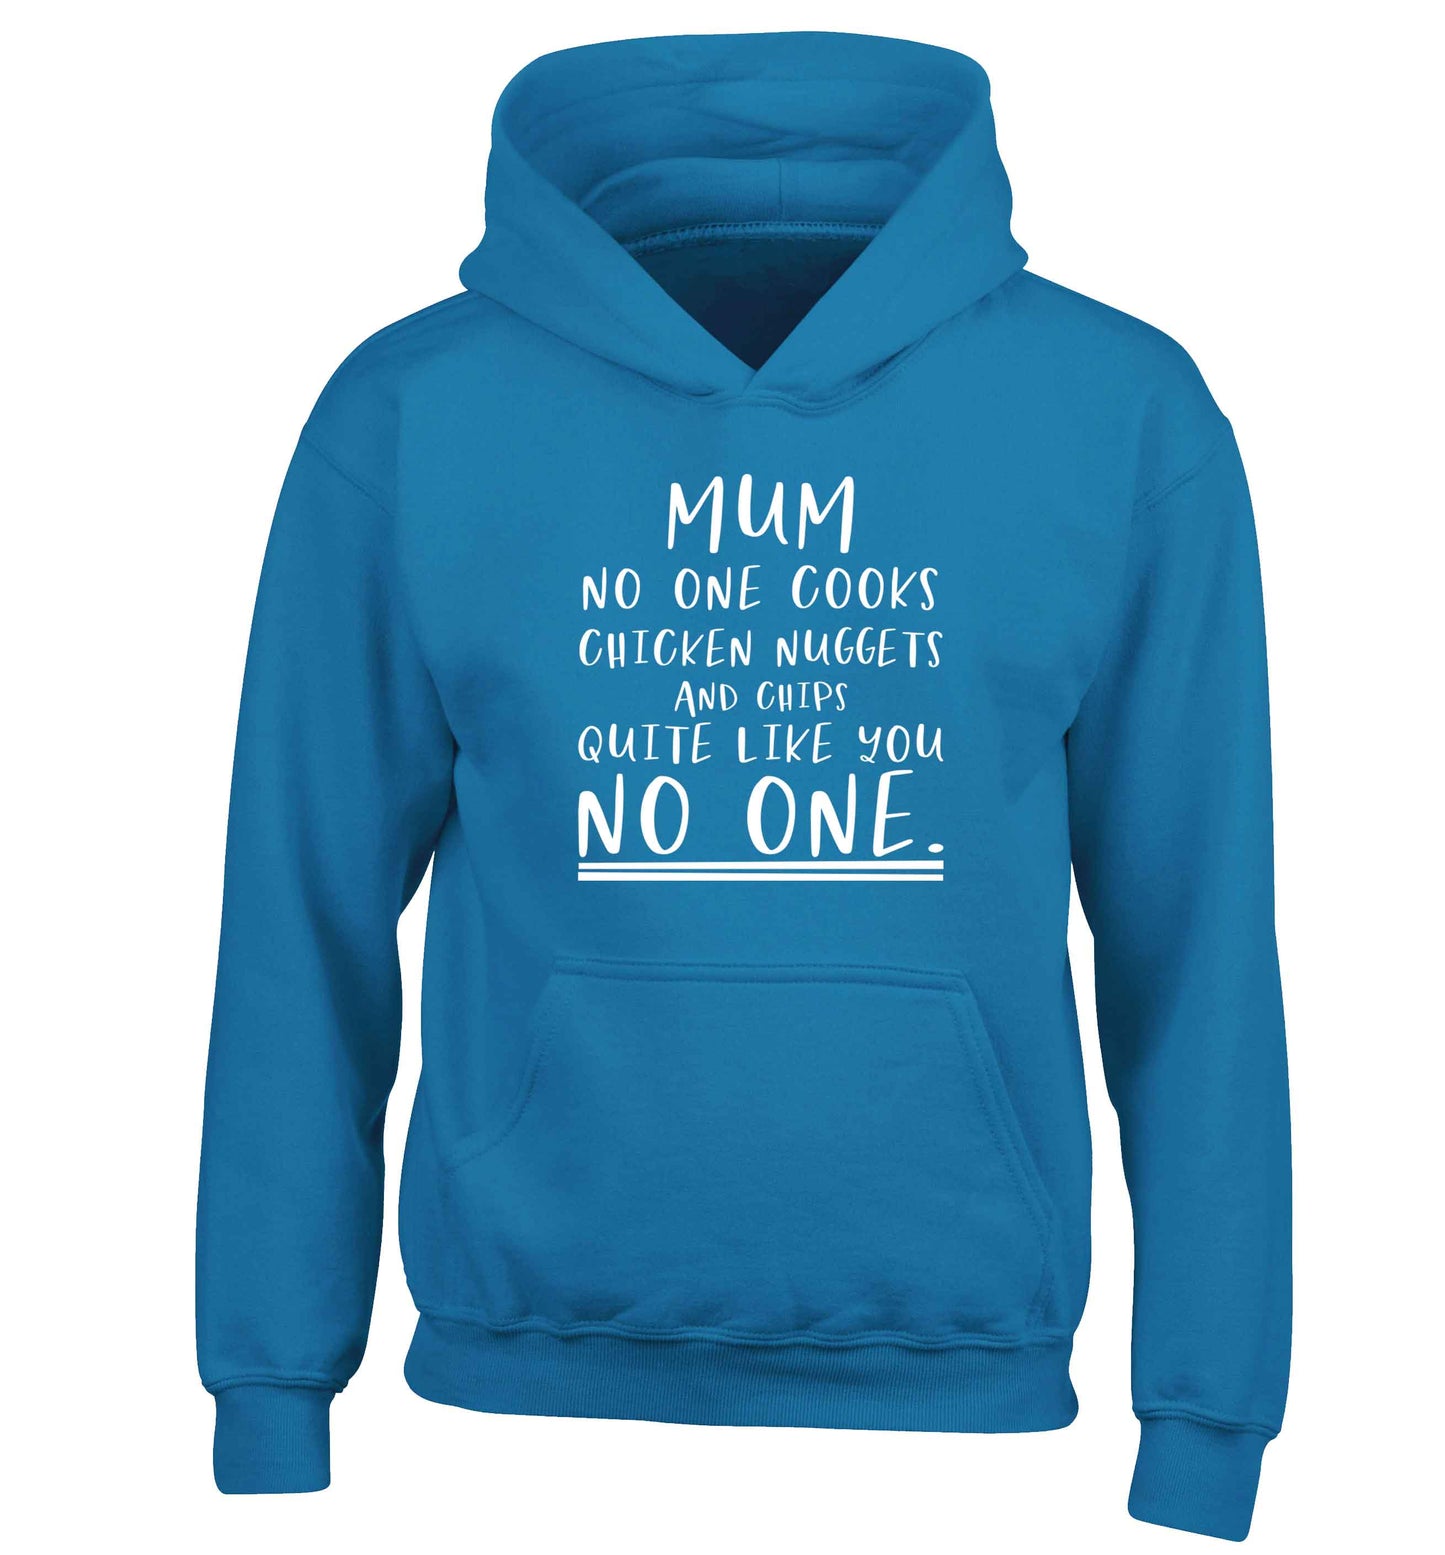 Super funny sassy gift for mother's day or birthday!  Mum no one cooks chicken nuggets and chips like you no one children's blue hoodie 12-13 Years